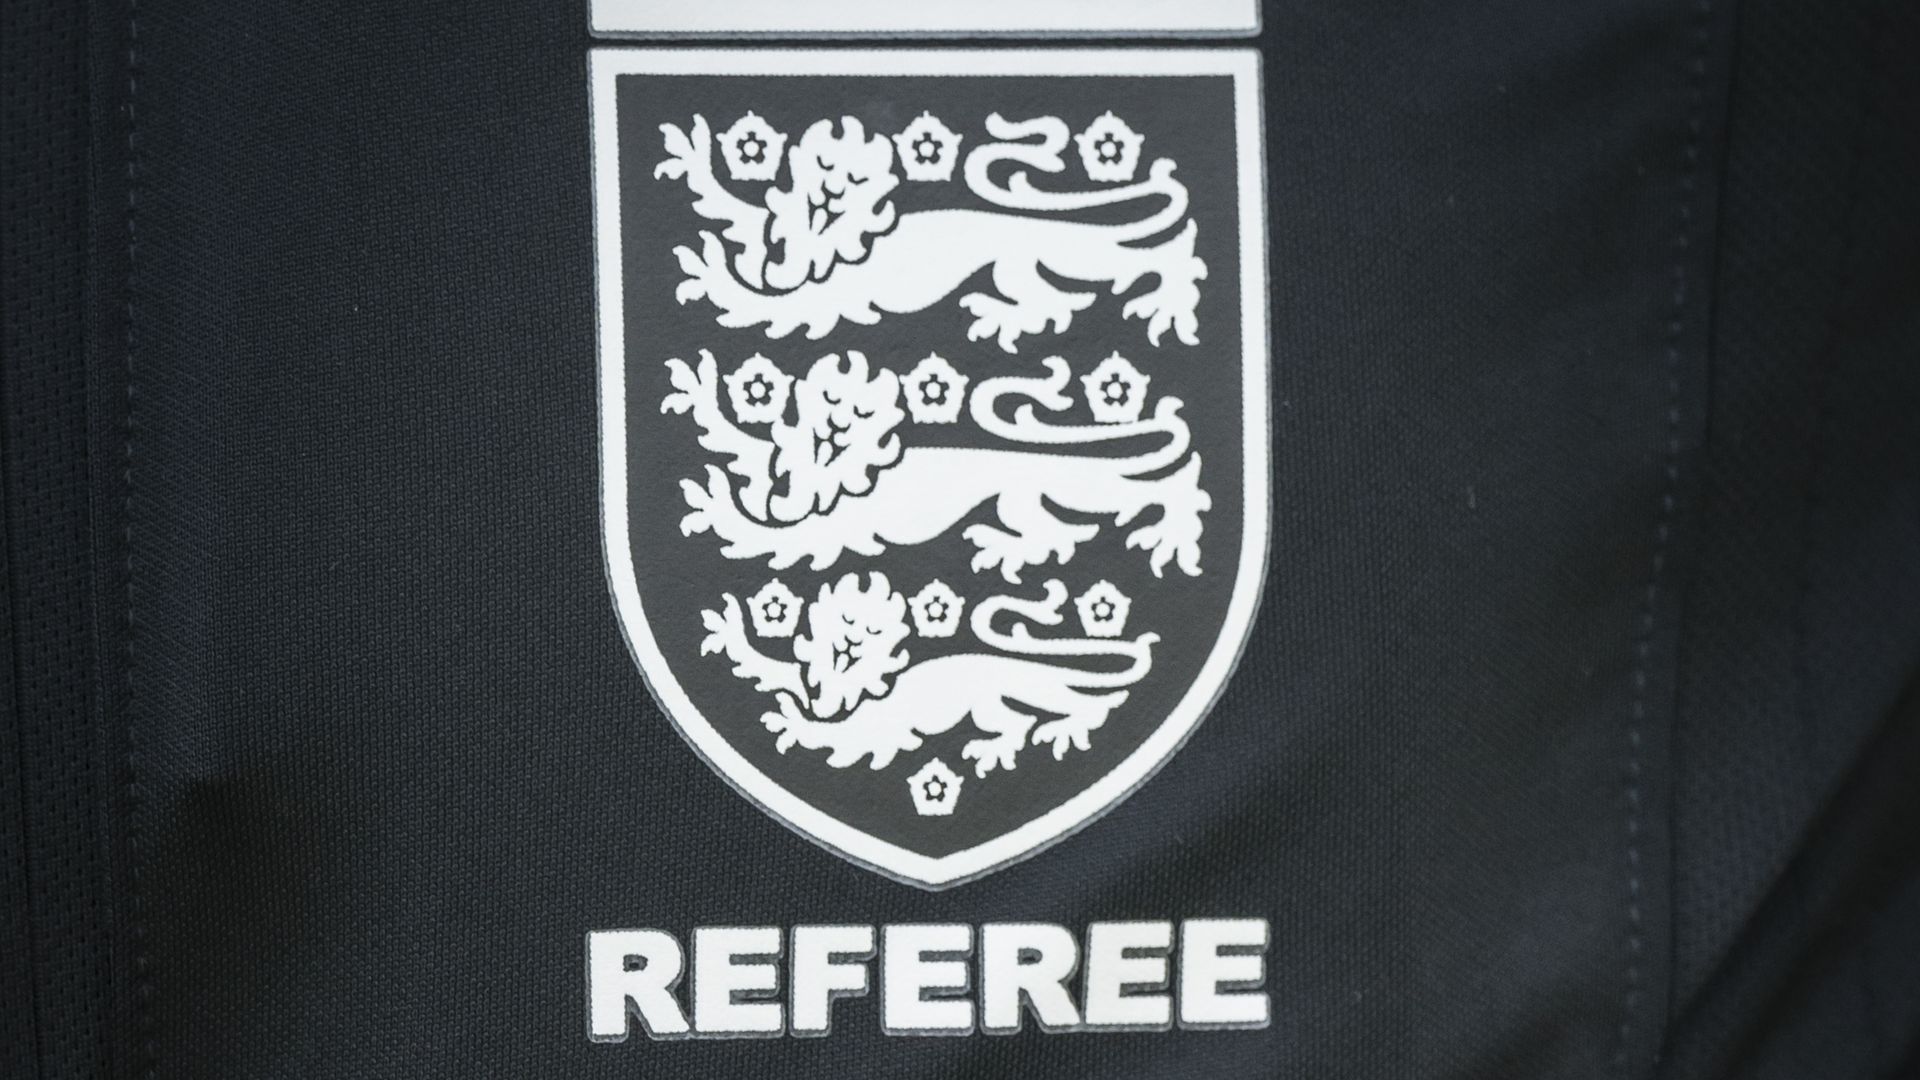 Allegations of serious offences against referees on rise in grassroots game